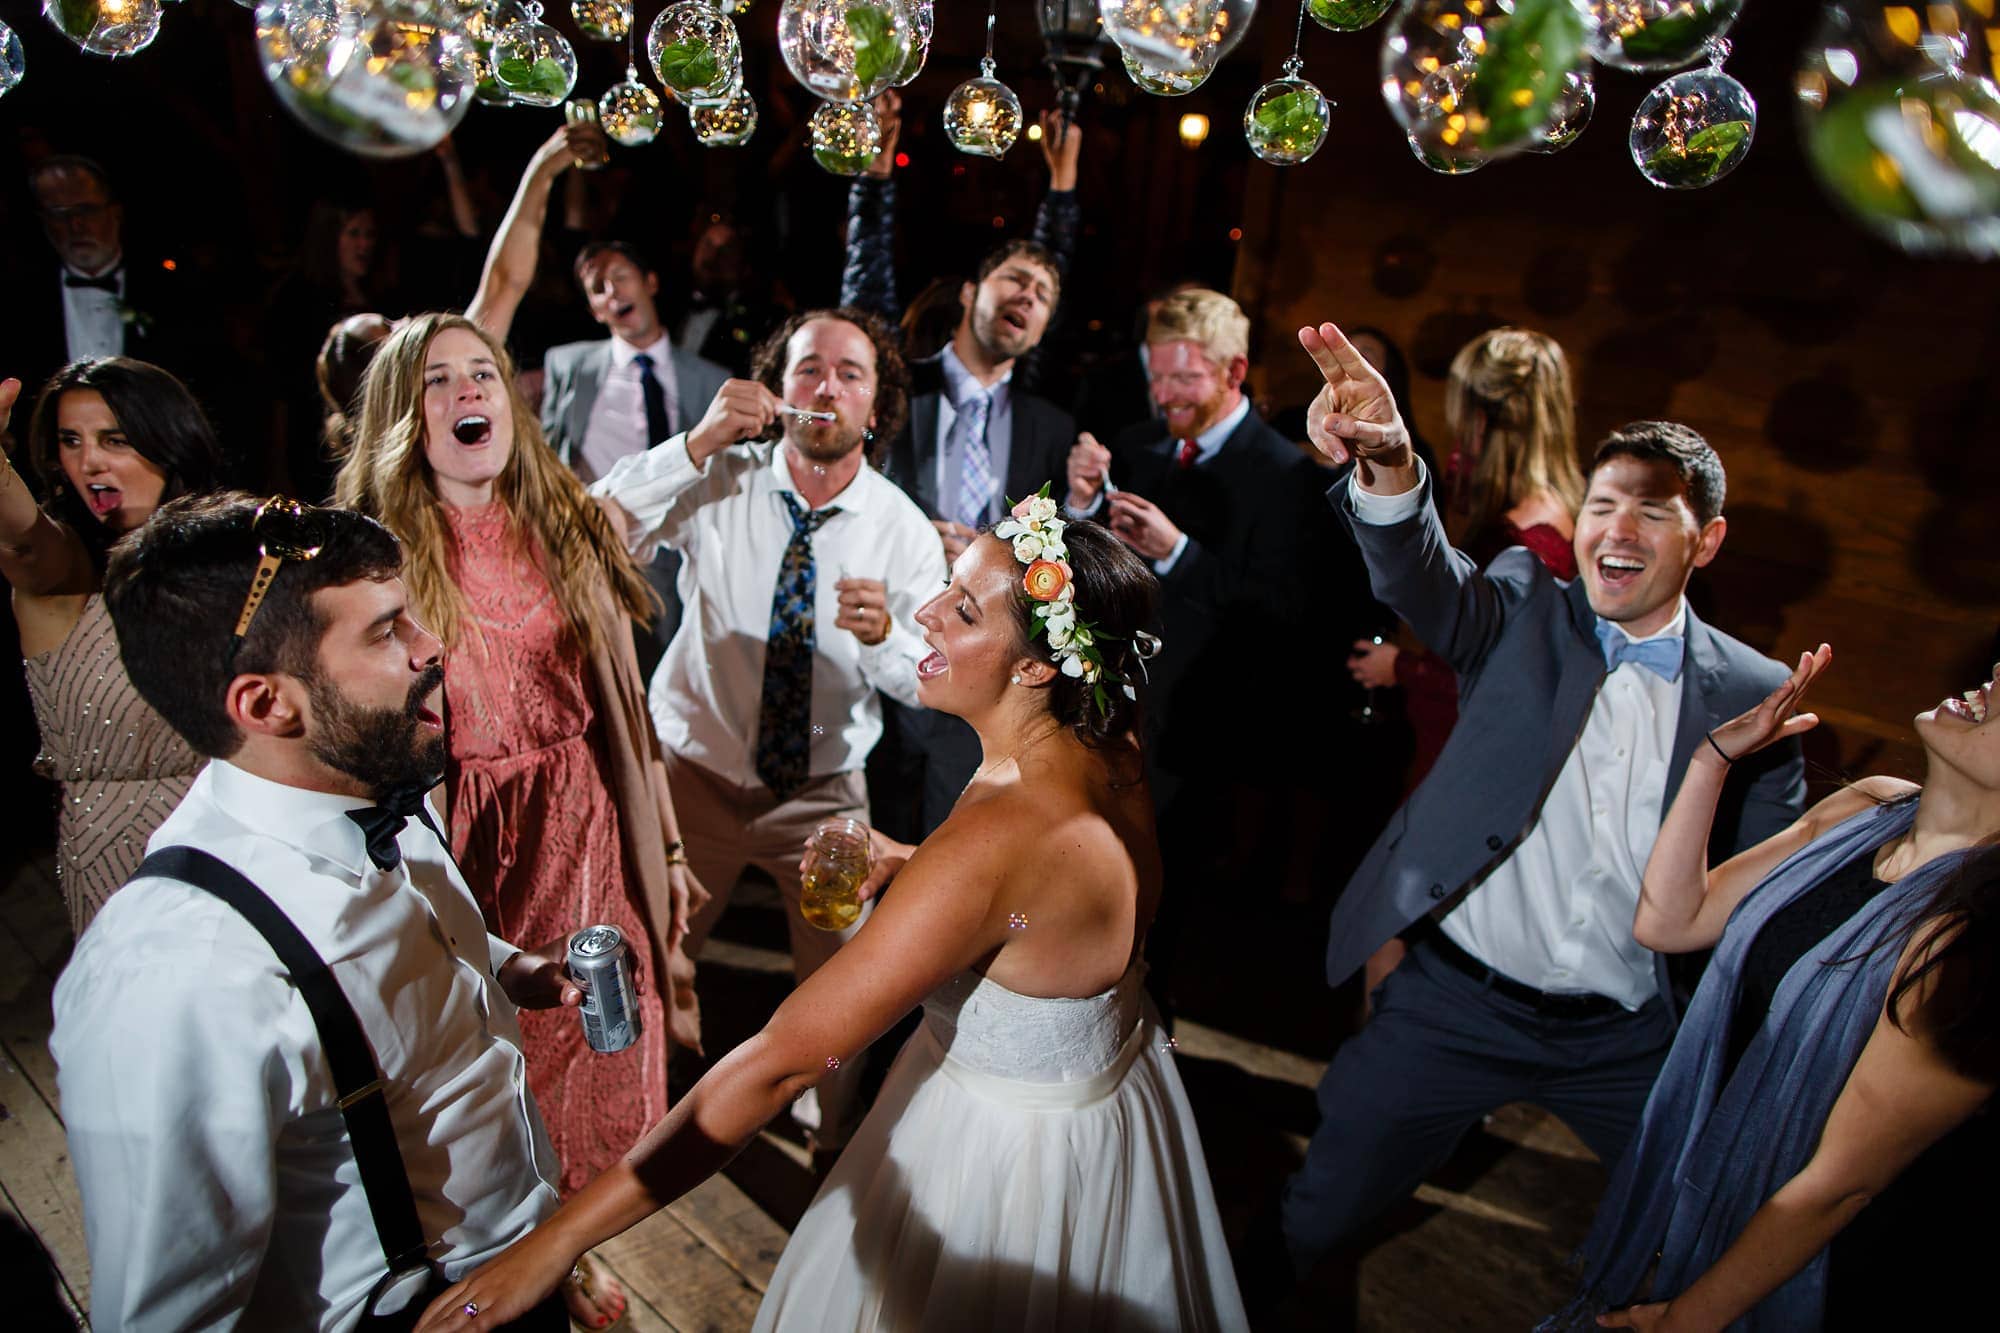 Guests dance during the reception at Piney River Ranch near Vail, Colorado.